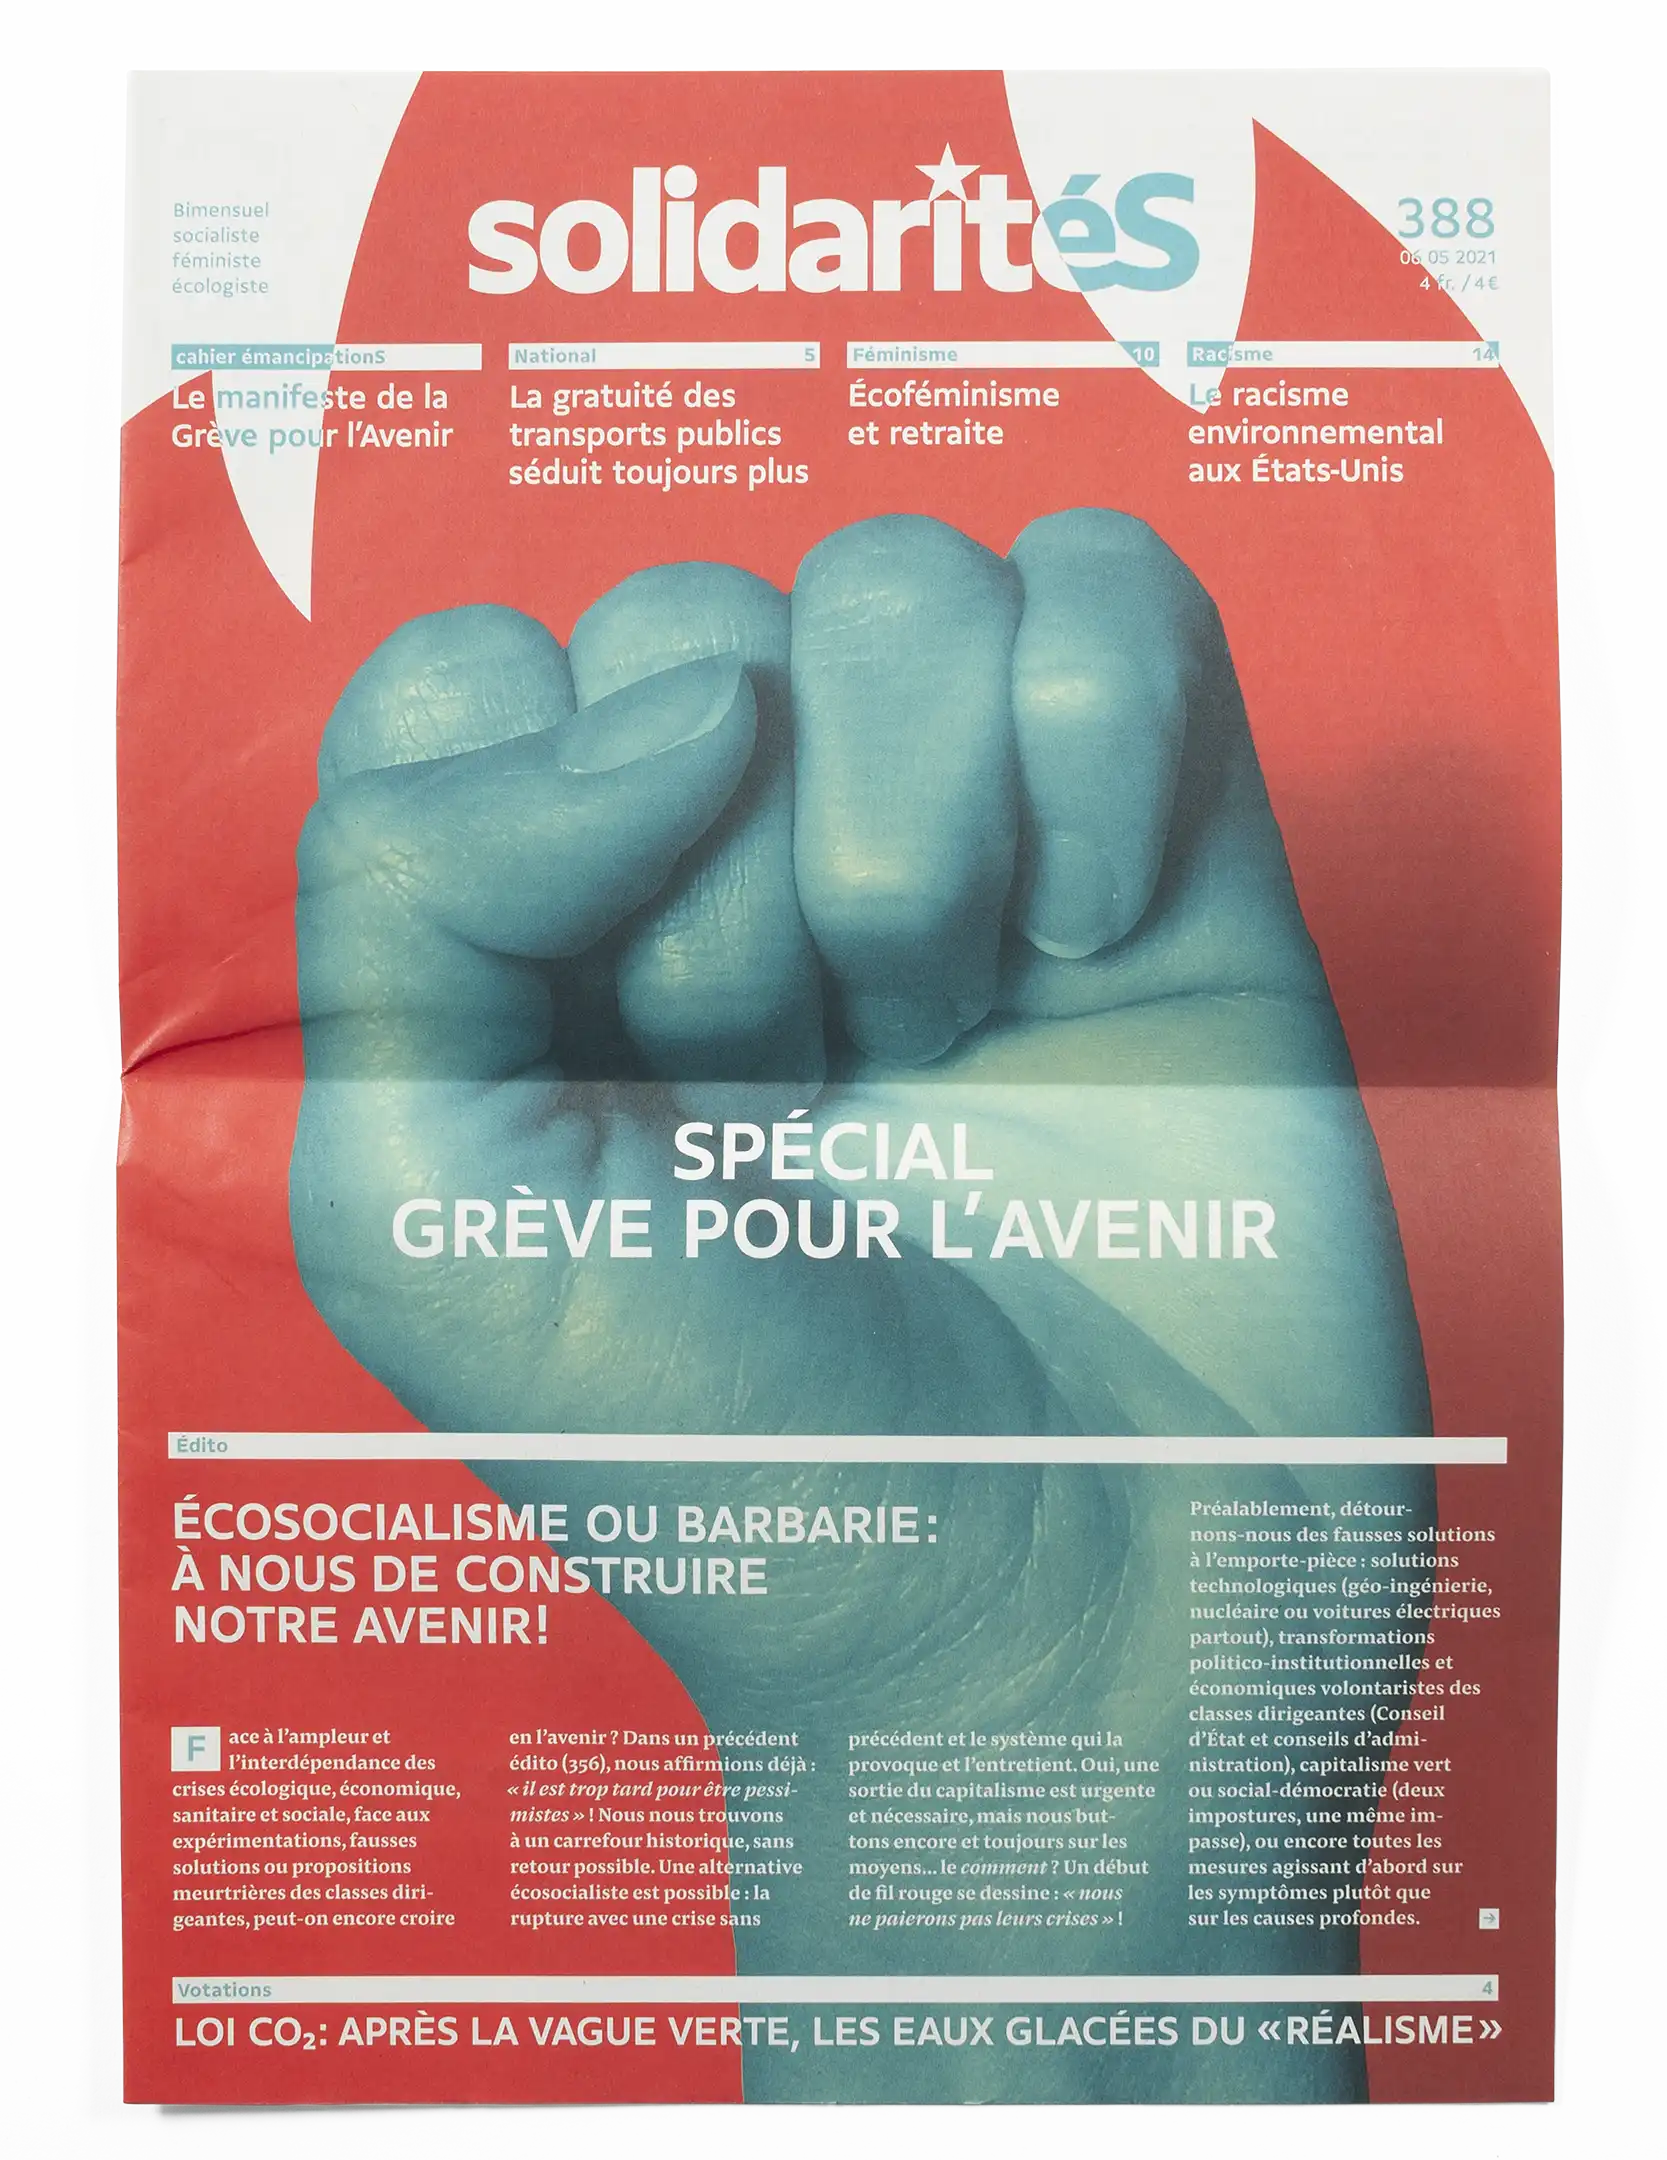 Cover of solidaritéS journal issue 388, with a photo of a raised fist